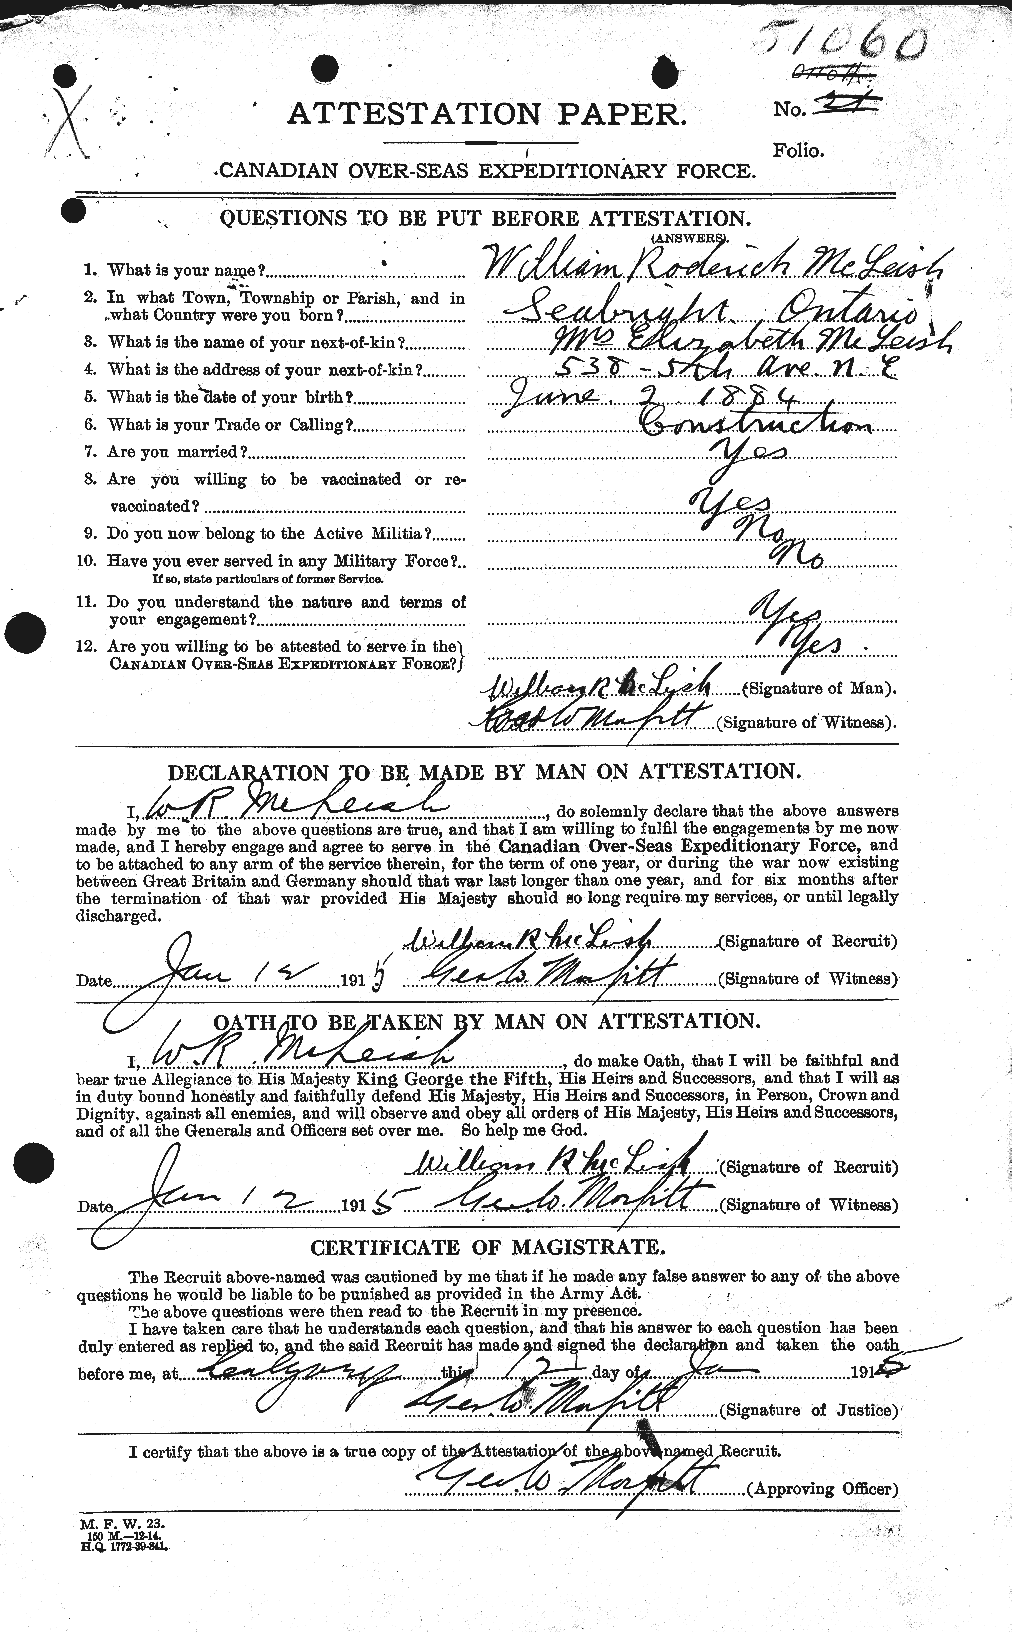 Personnel Records of the First World War - CEF 535349a